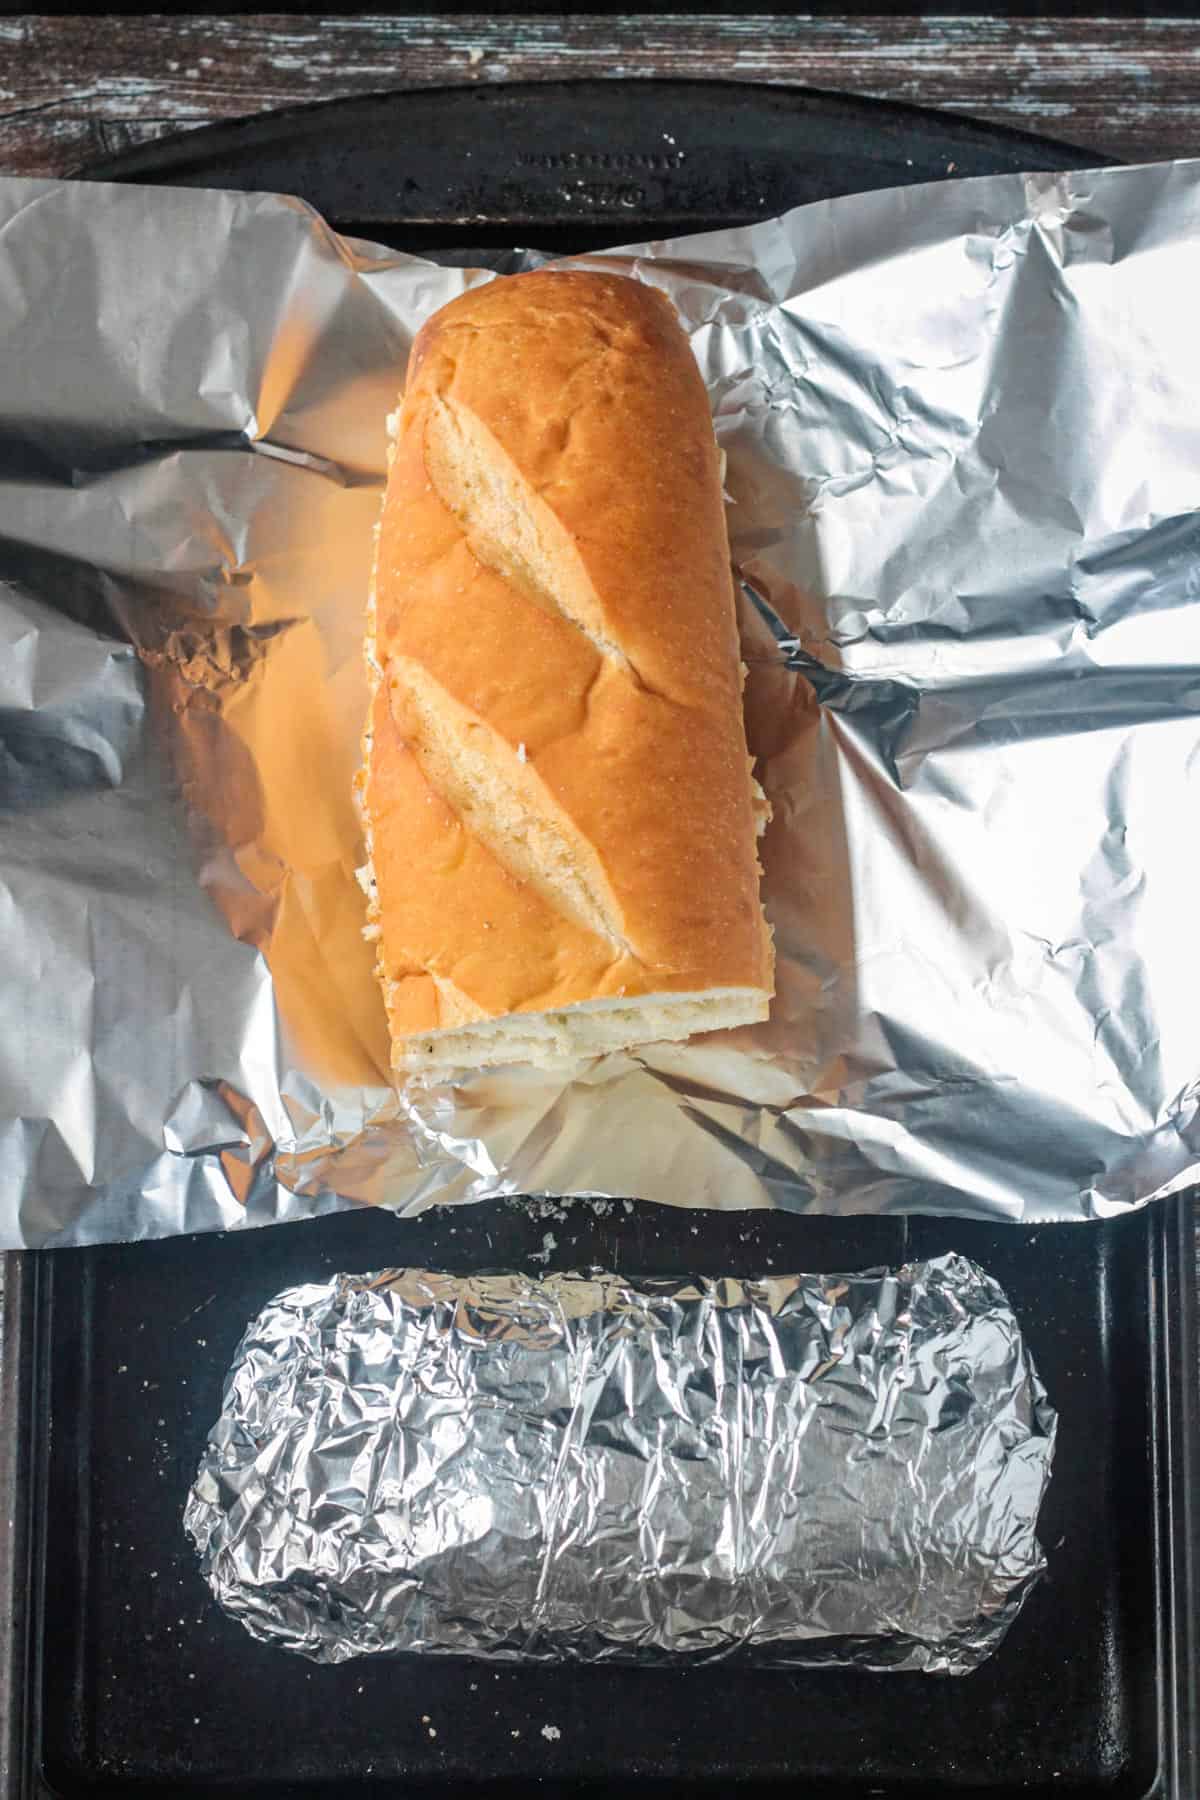 Wrapping garlic bread halves in foil to prepare for baking.